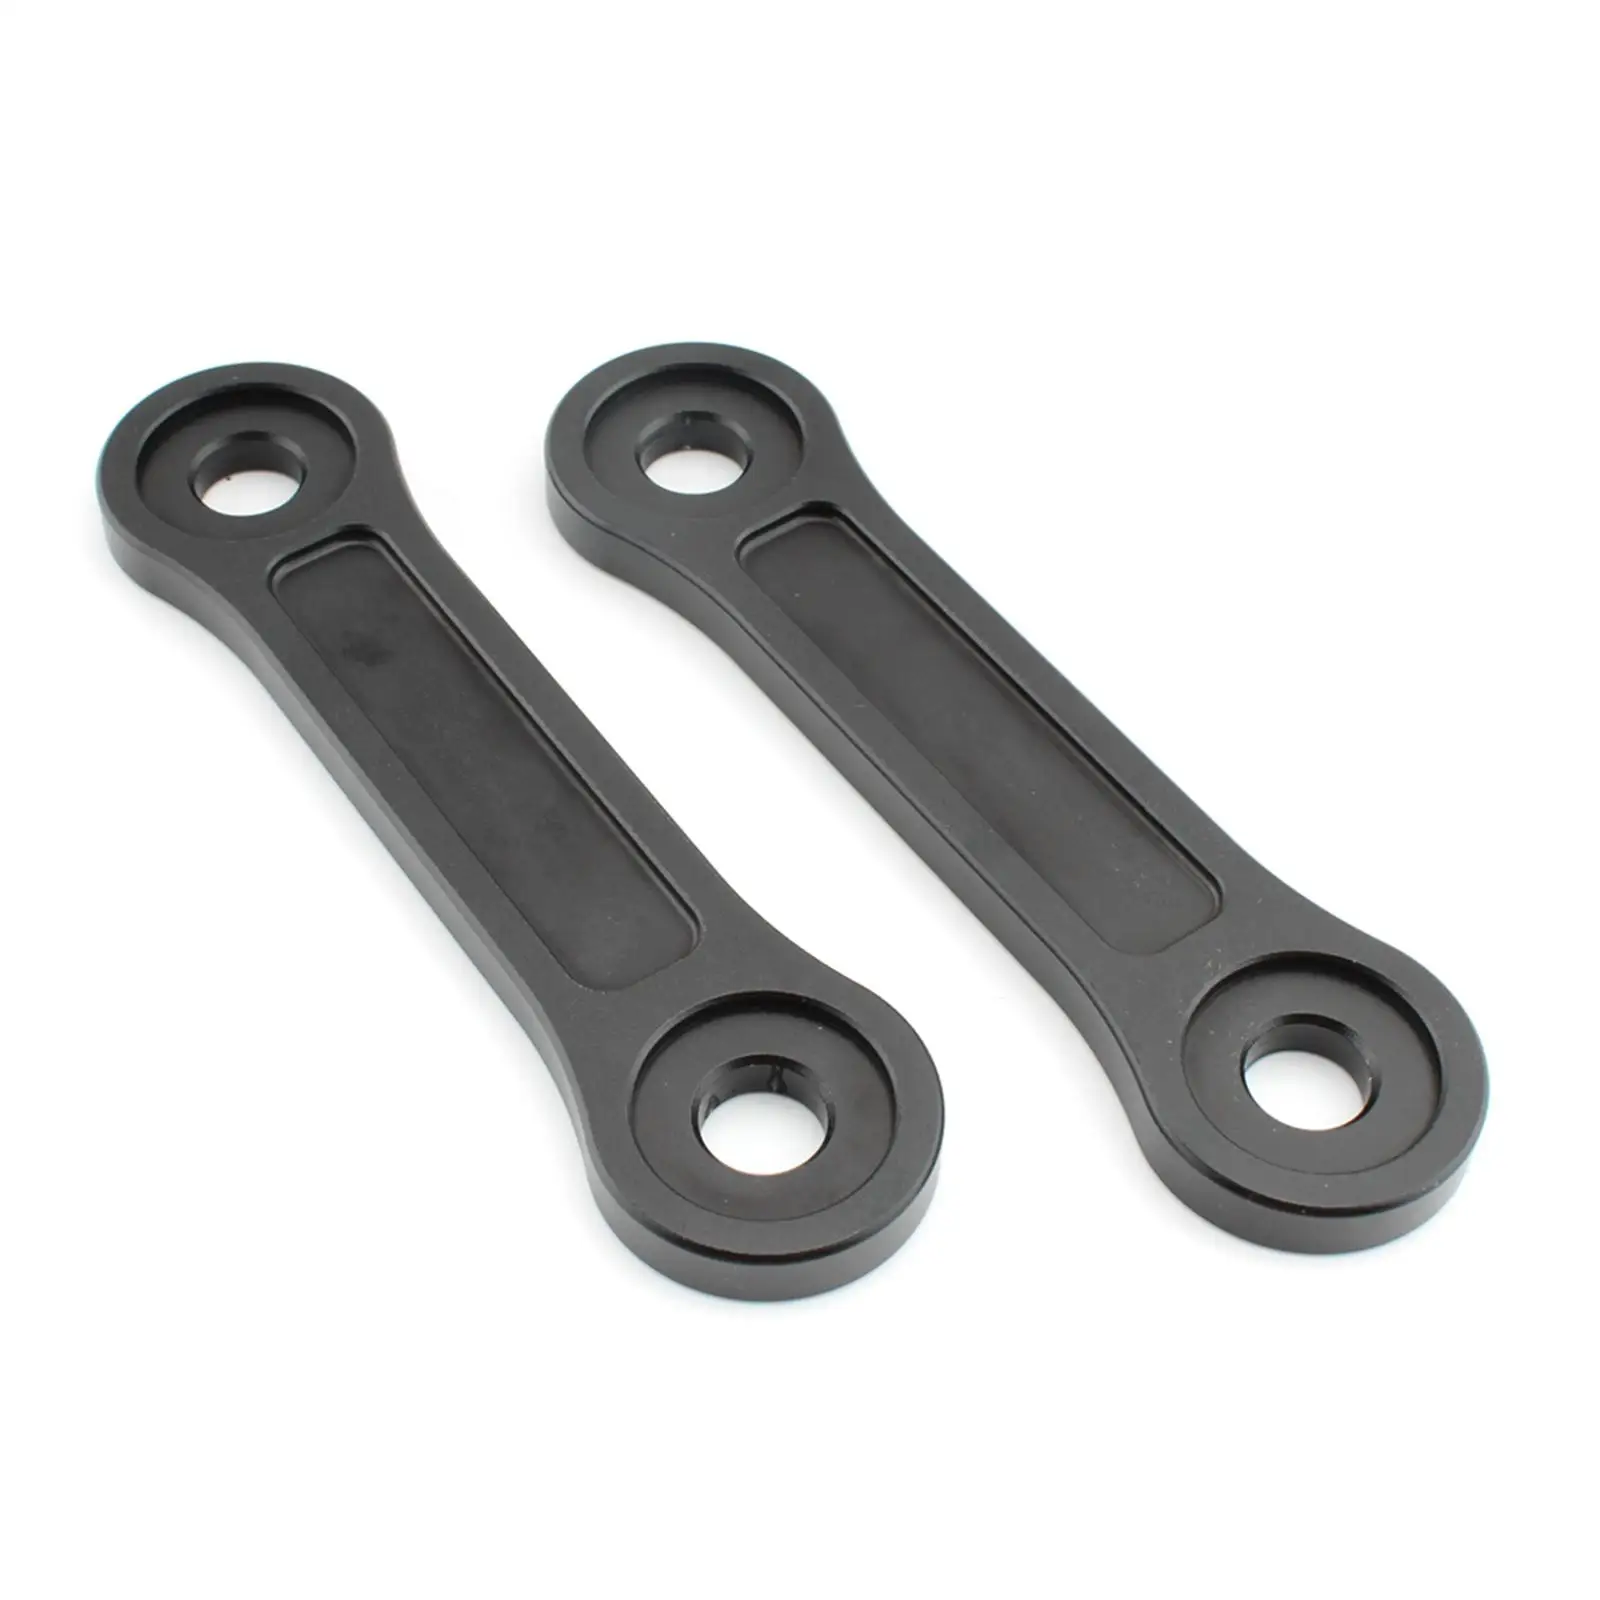 2x Motorcycle Rear Lowering Kit Easy Installation Aluminium Alloy Accessories 20mm for Tiger 1200 GT Pro Rally Explorer